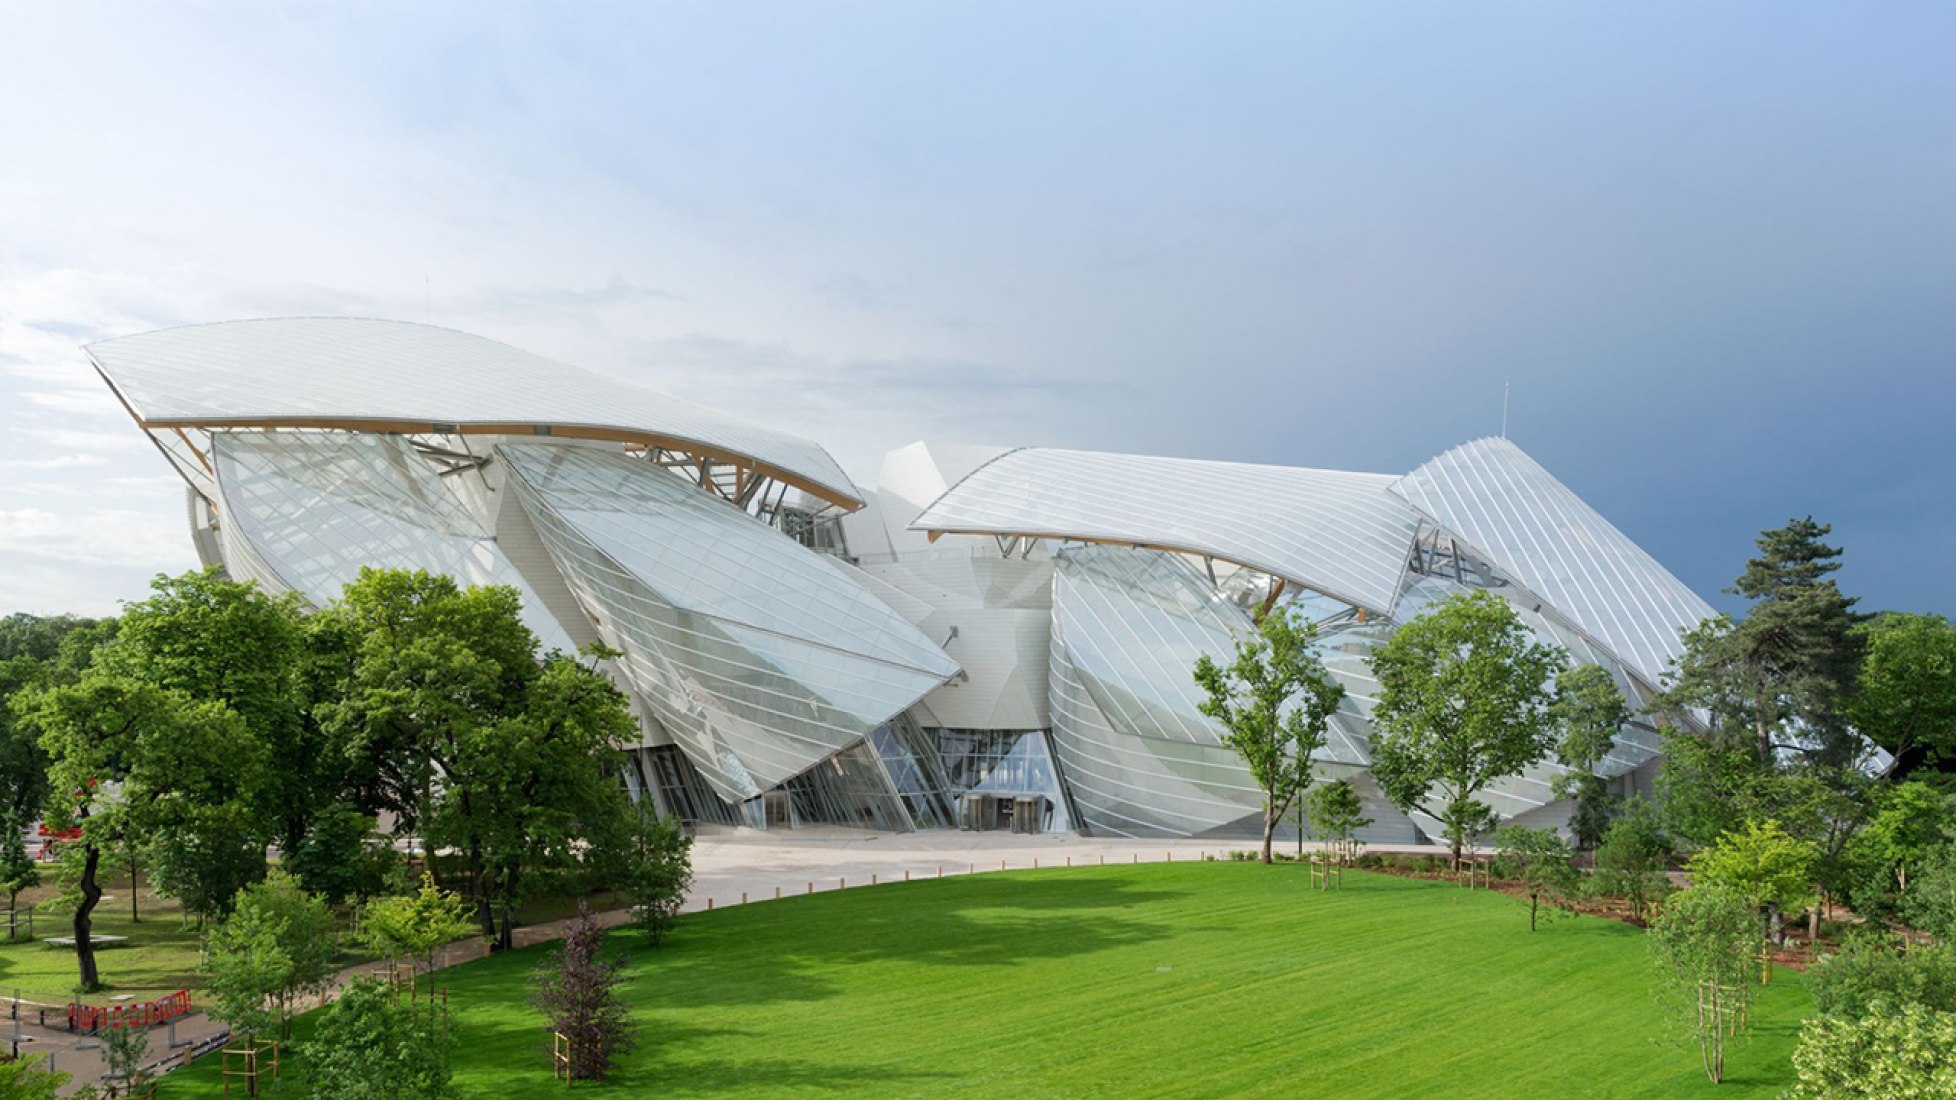 The new Foundation Louis Vuitton by Frank Gehry rises in Paris